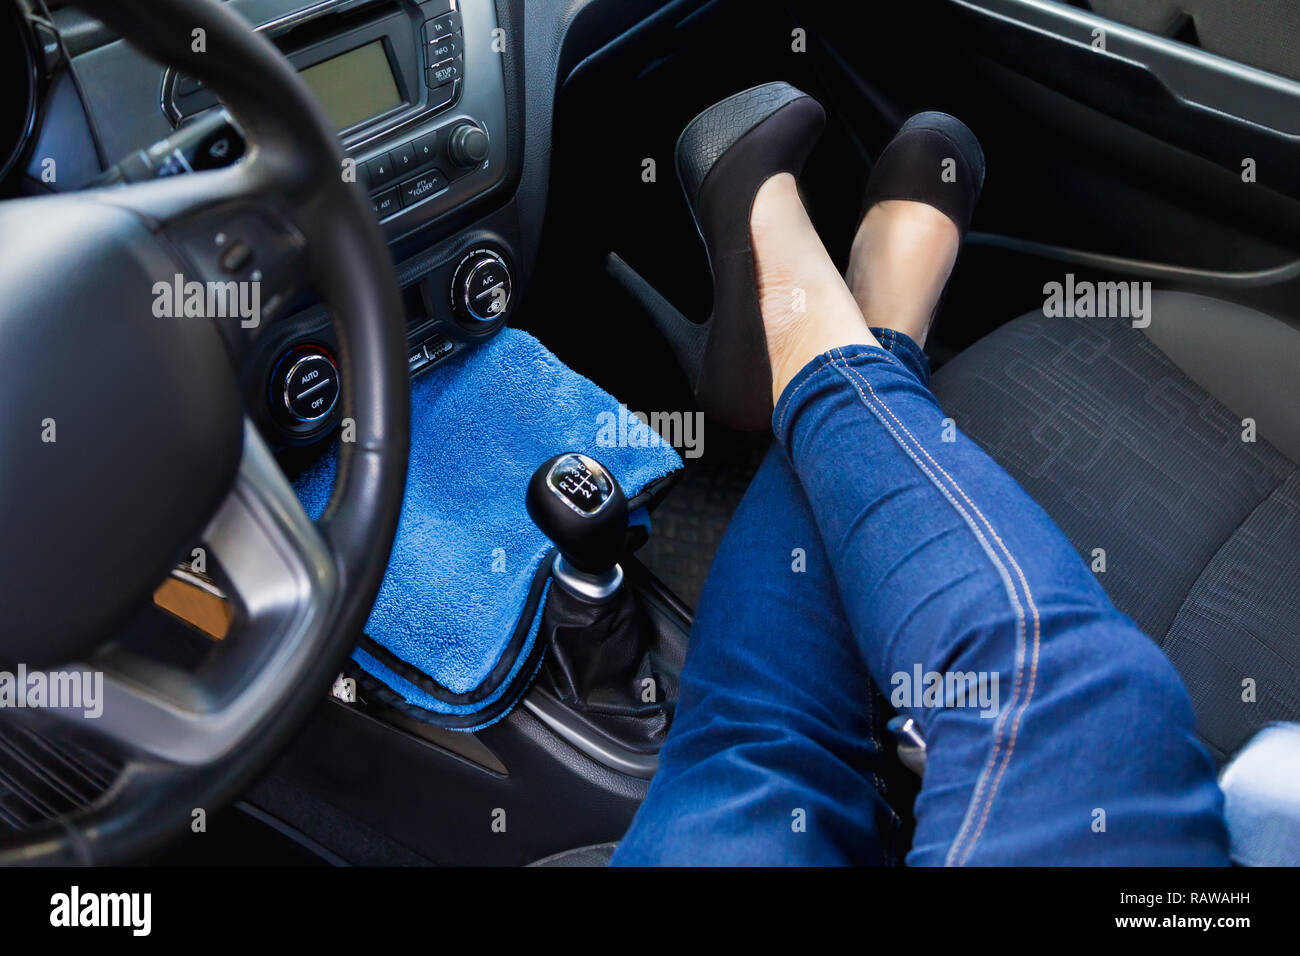 women's feet wearing blue denim jeans and in high heels inside the car  Stock Photo - Alamy